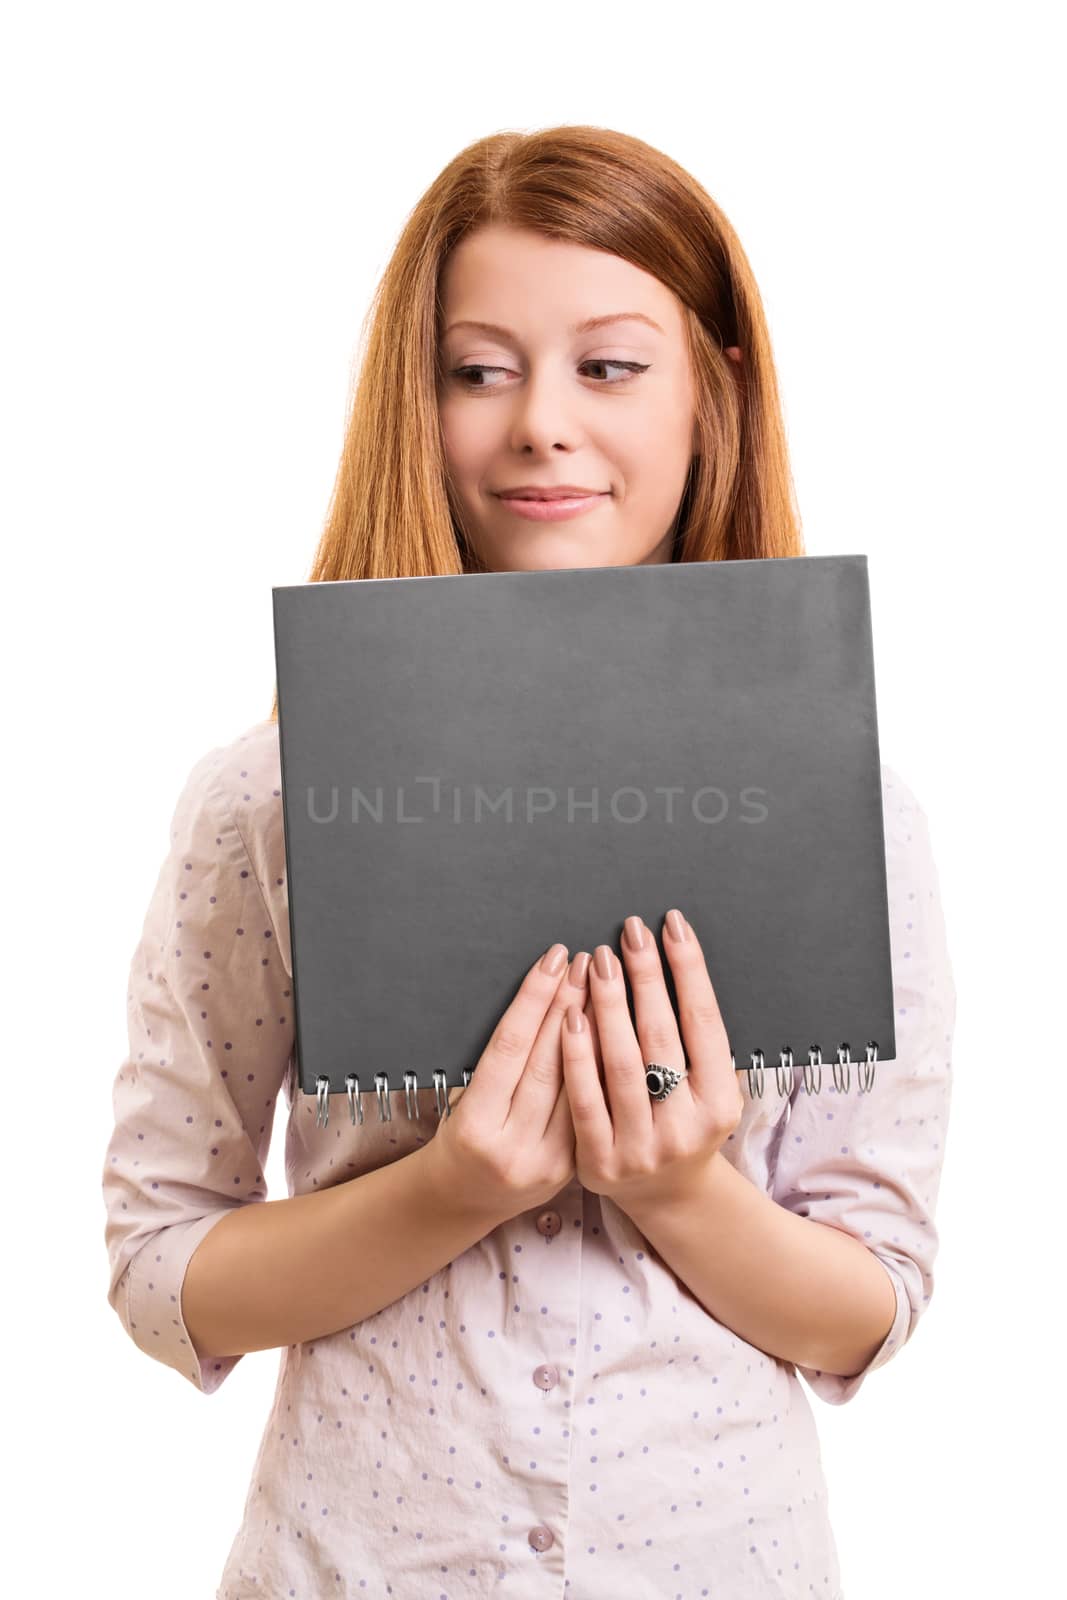 Smiling female student holding a book by Mendelex